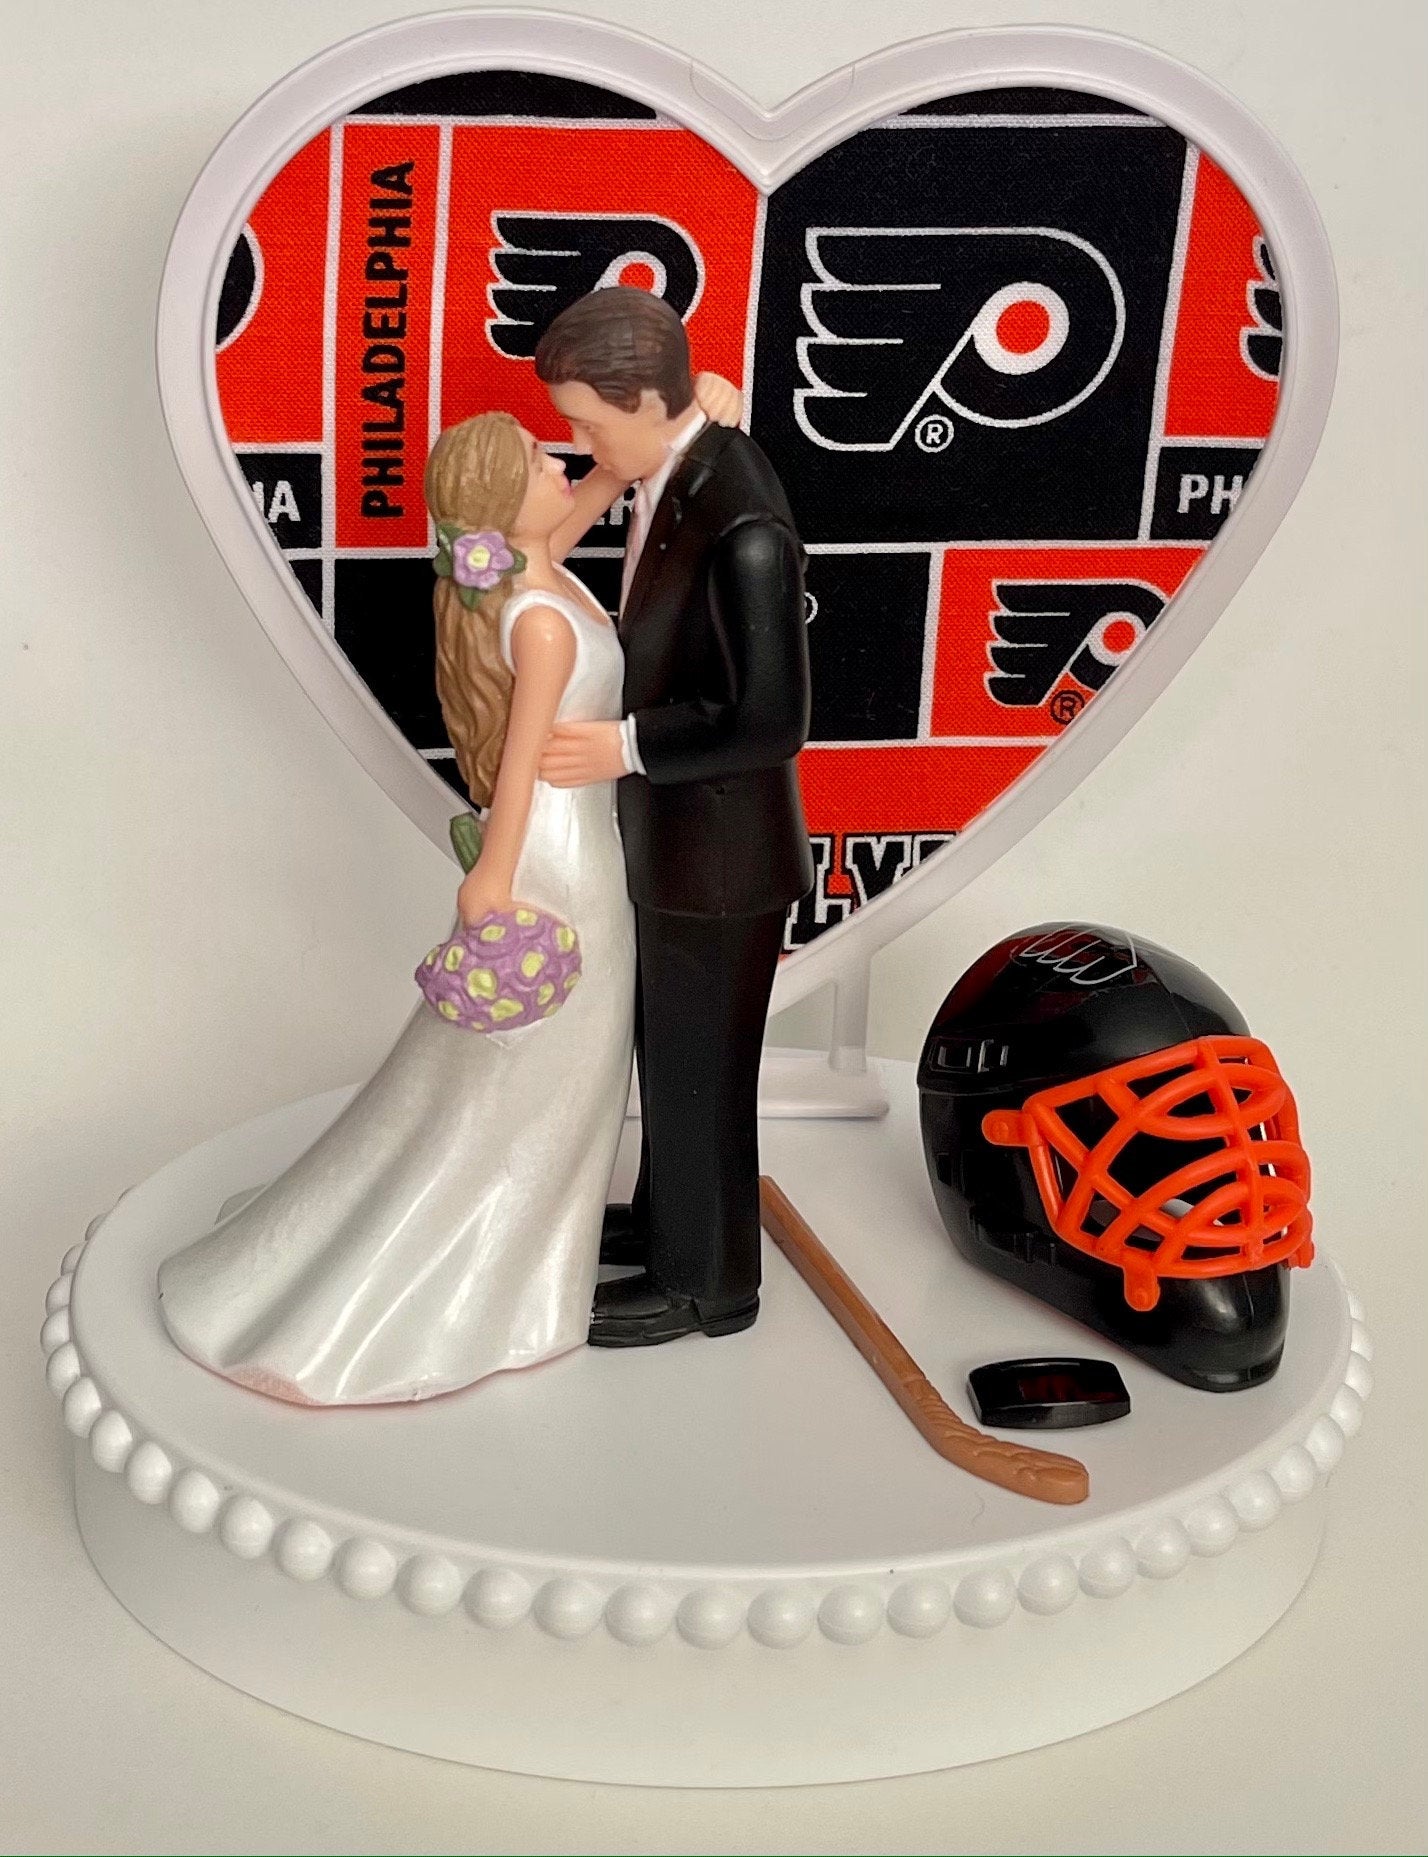 Wedding Cake Topper Philadelphia Flyers Hockey Themed Beautiful Long-Haired Bride and Groom Fun Groom's Cake Top Shower Gift Idea Reception